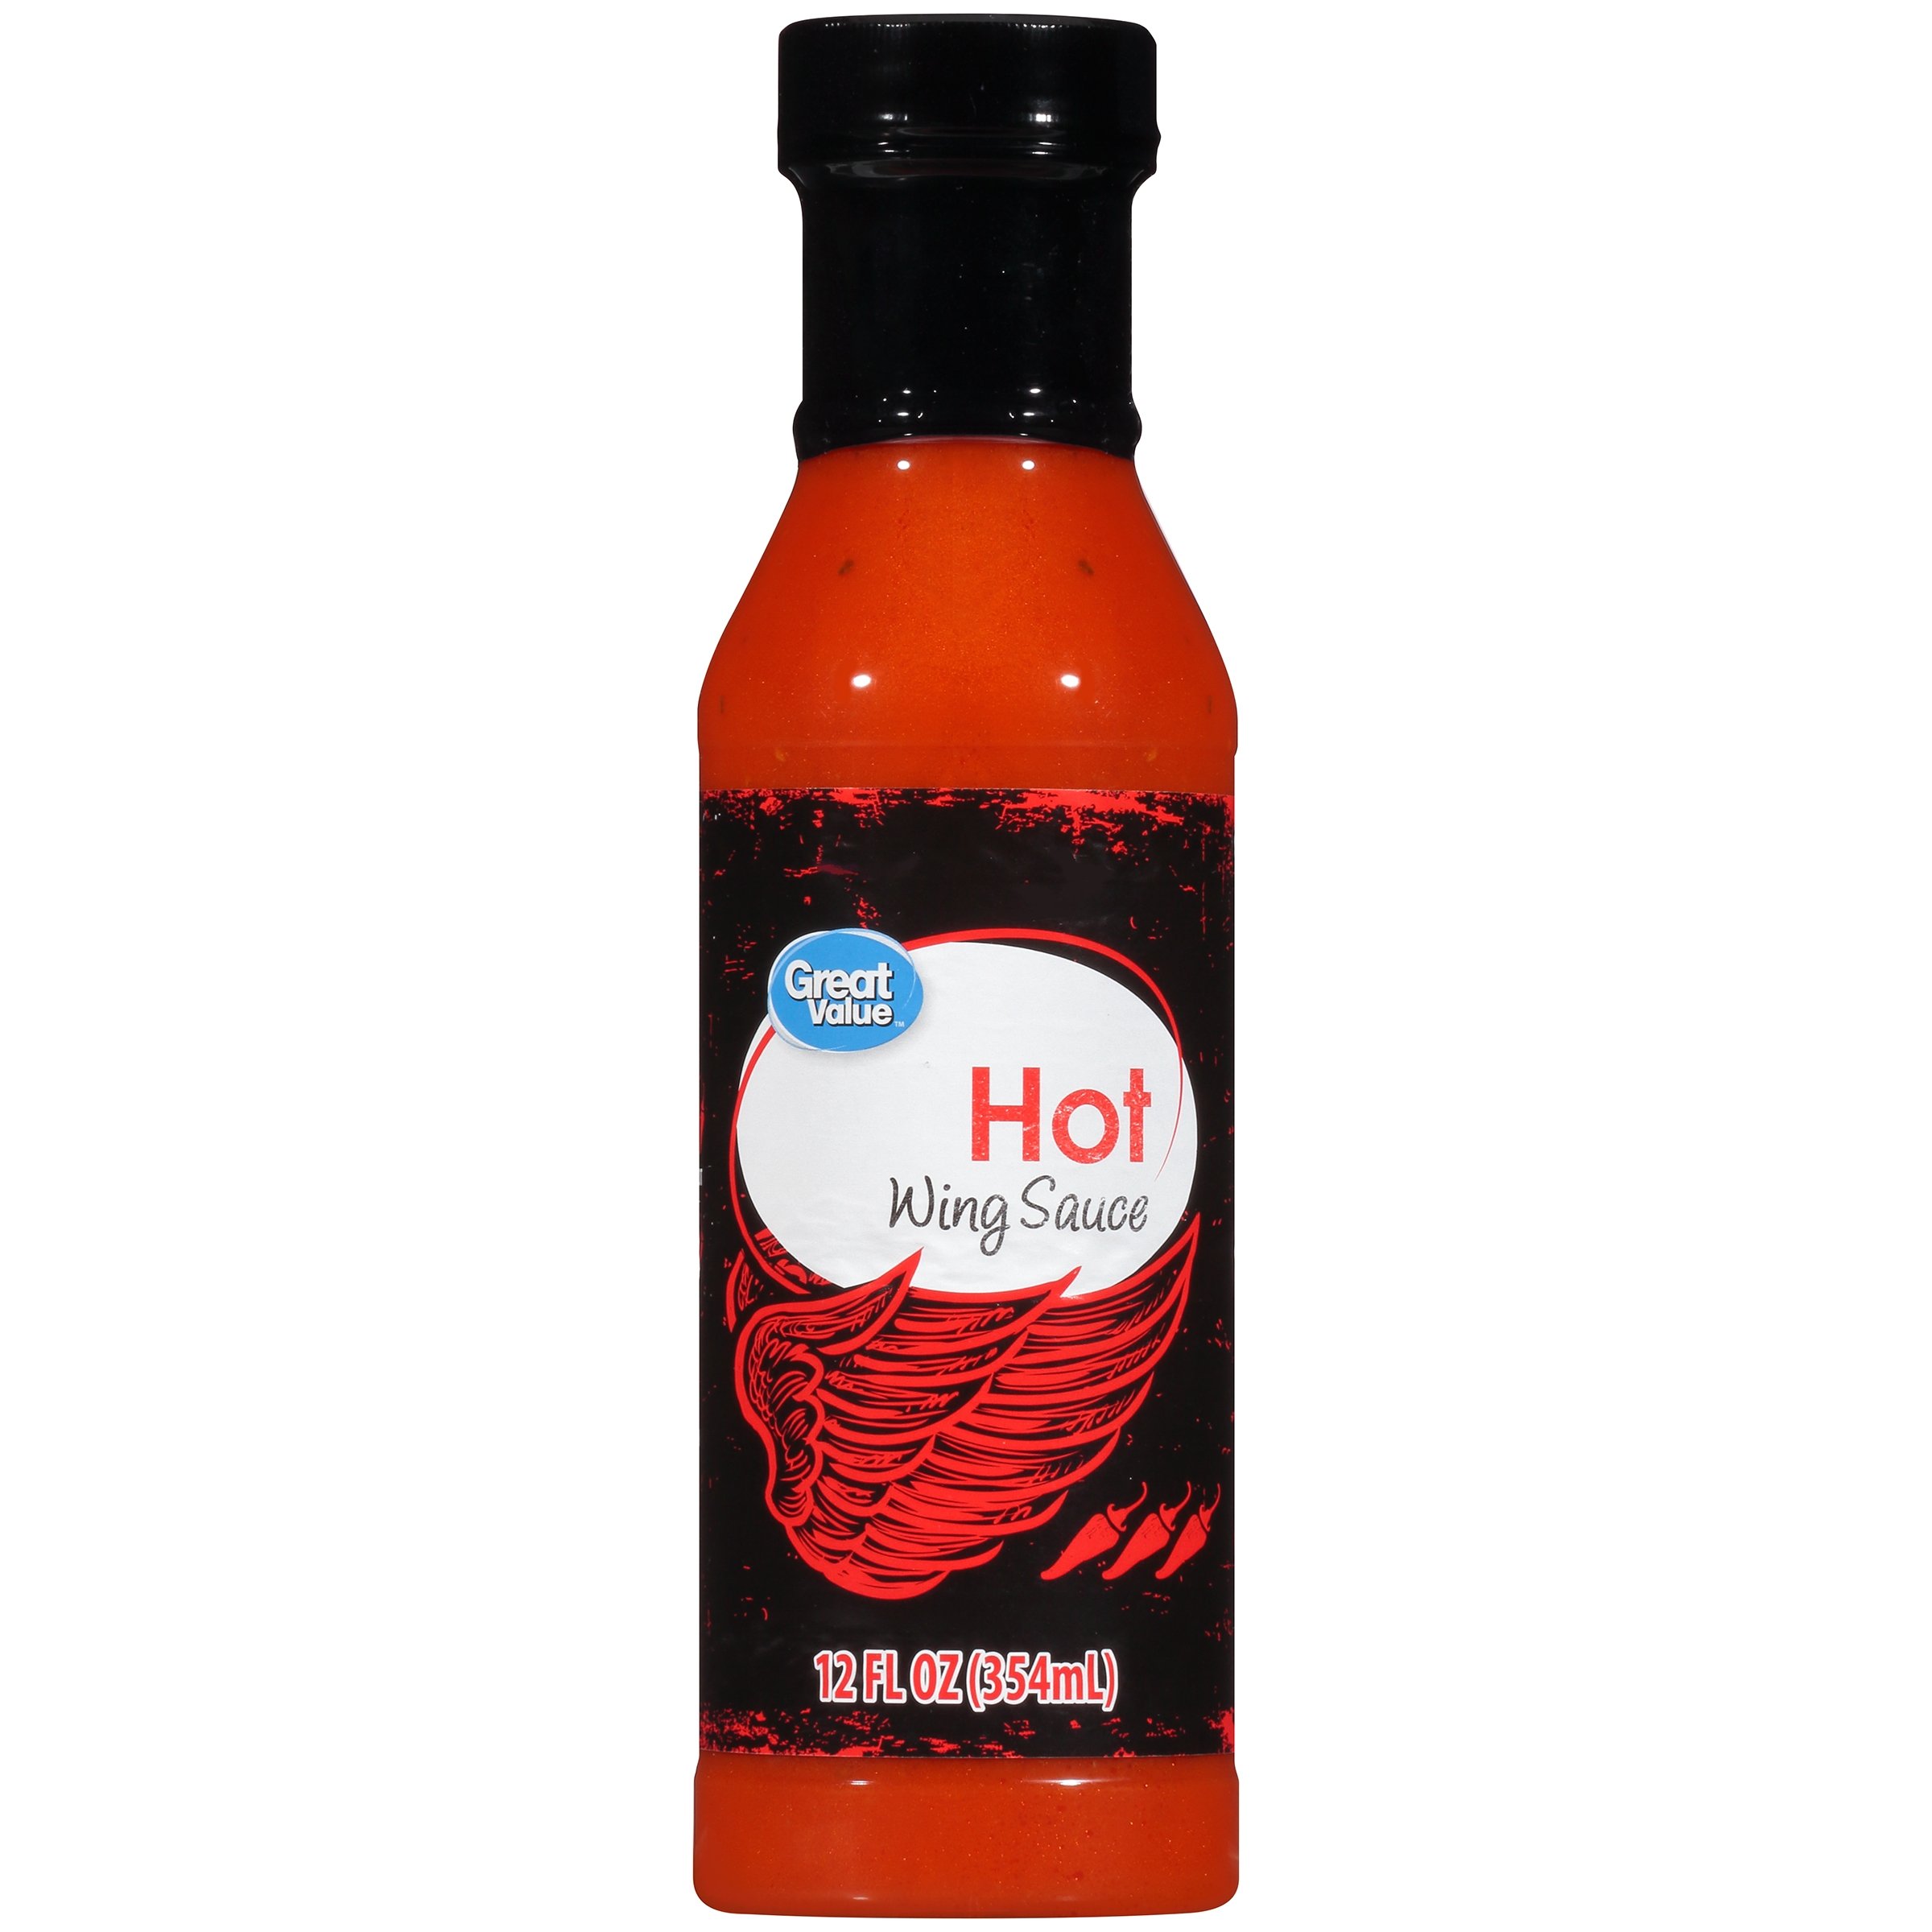 Great Value Hot Wing Sauce, 12 fl oz